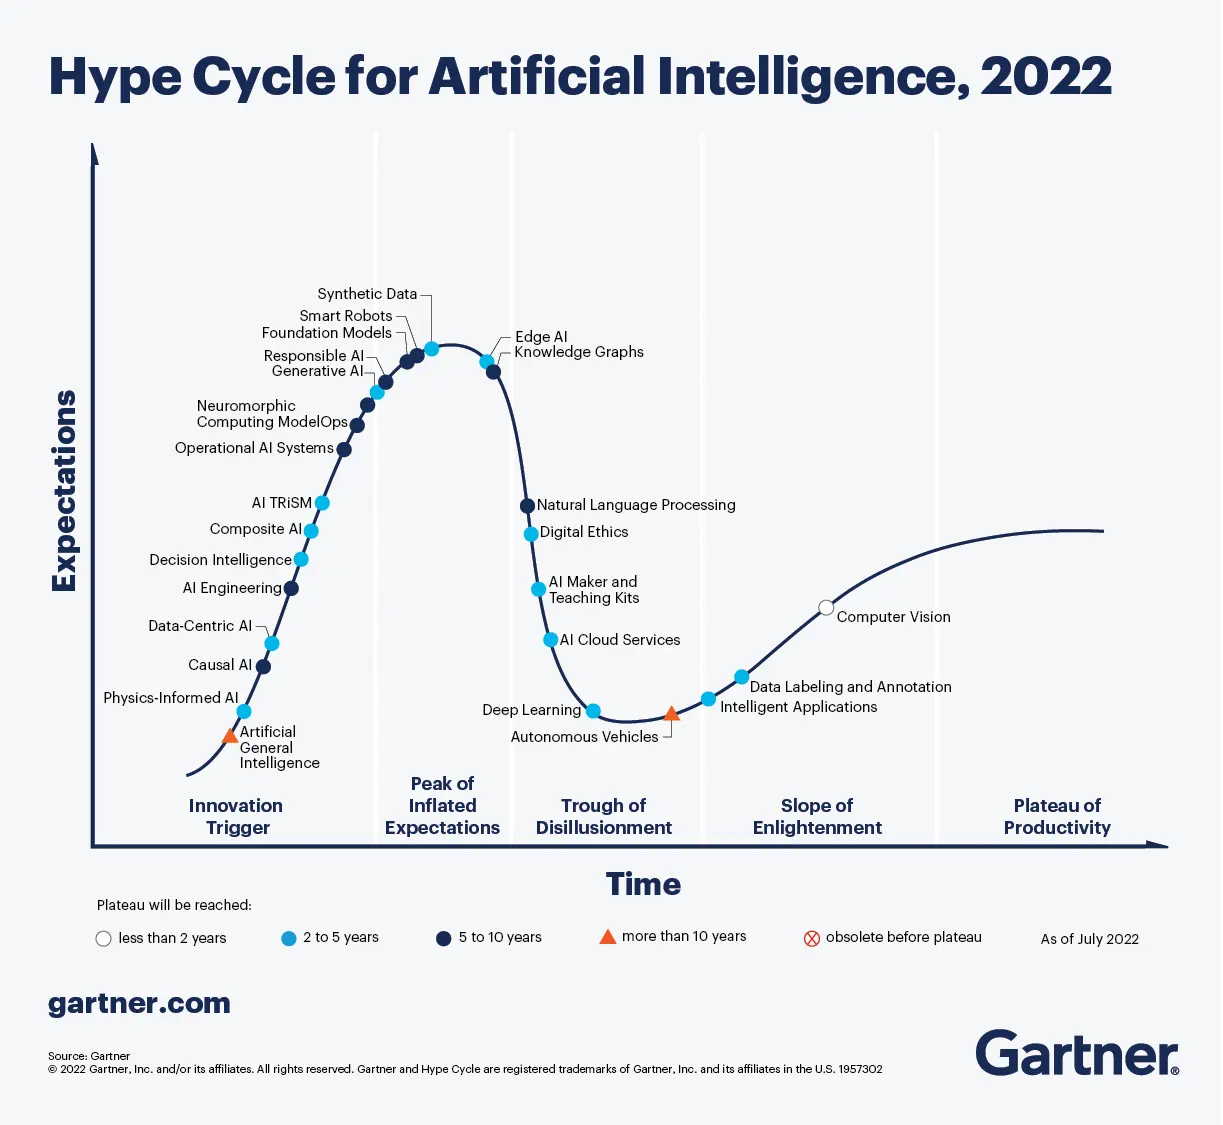 Gartner’s Hype Cycle for Artificial Intelligence, 2022